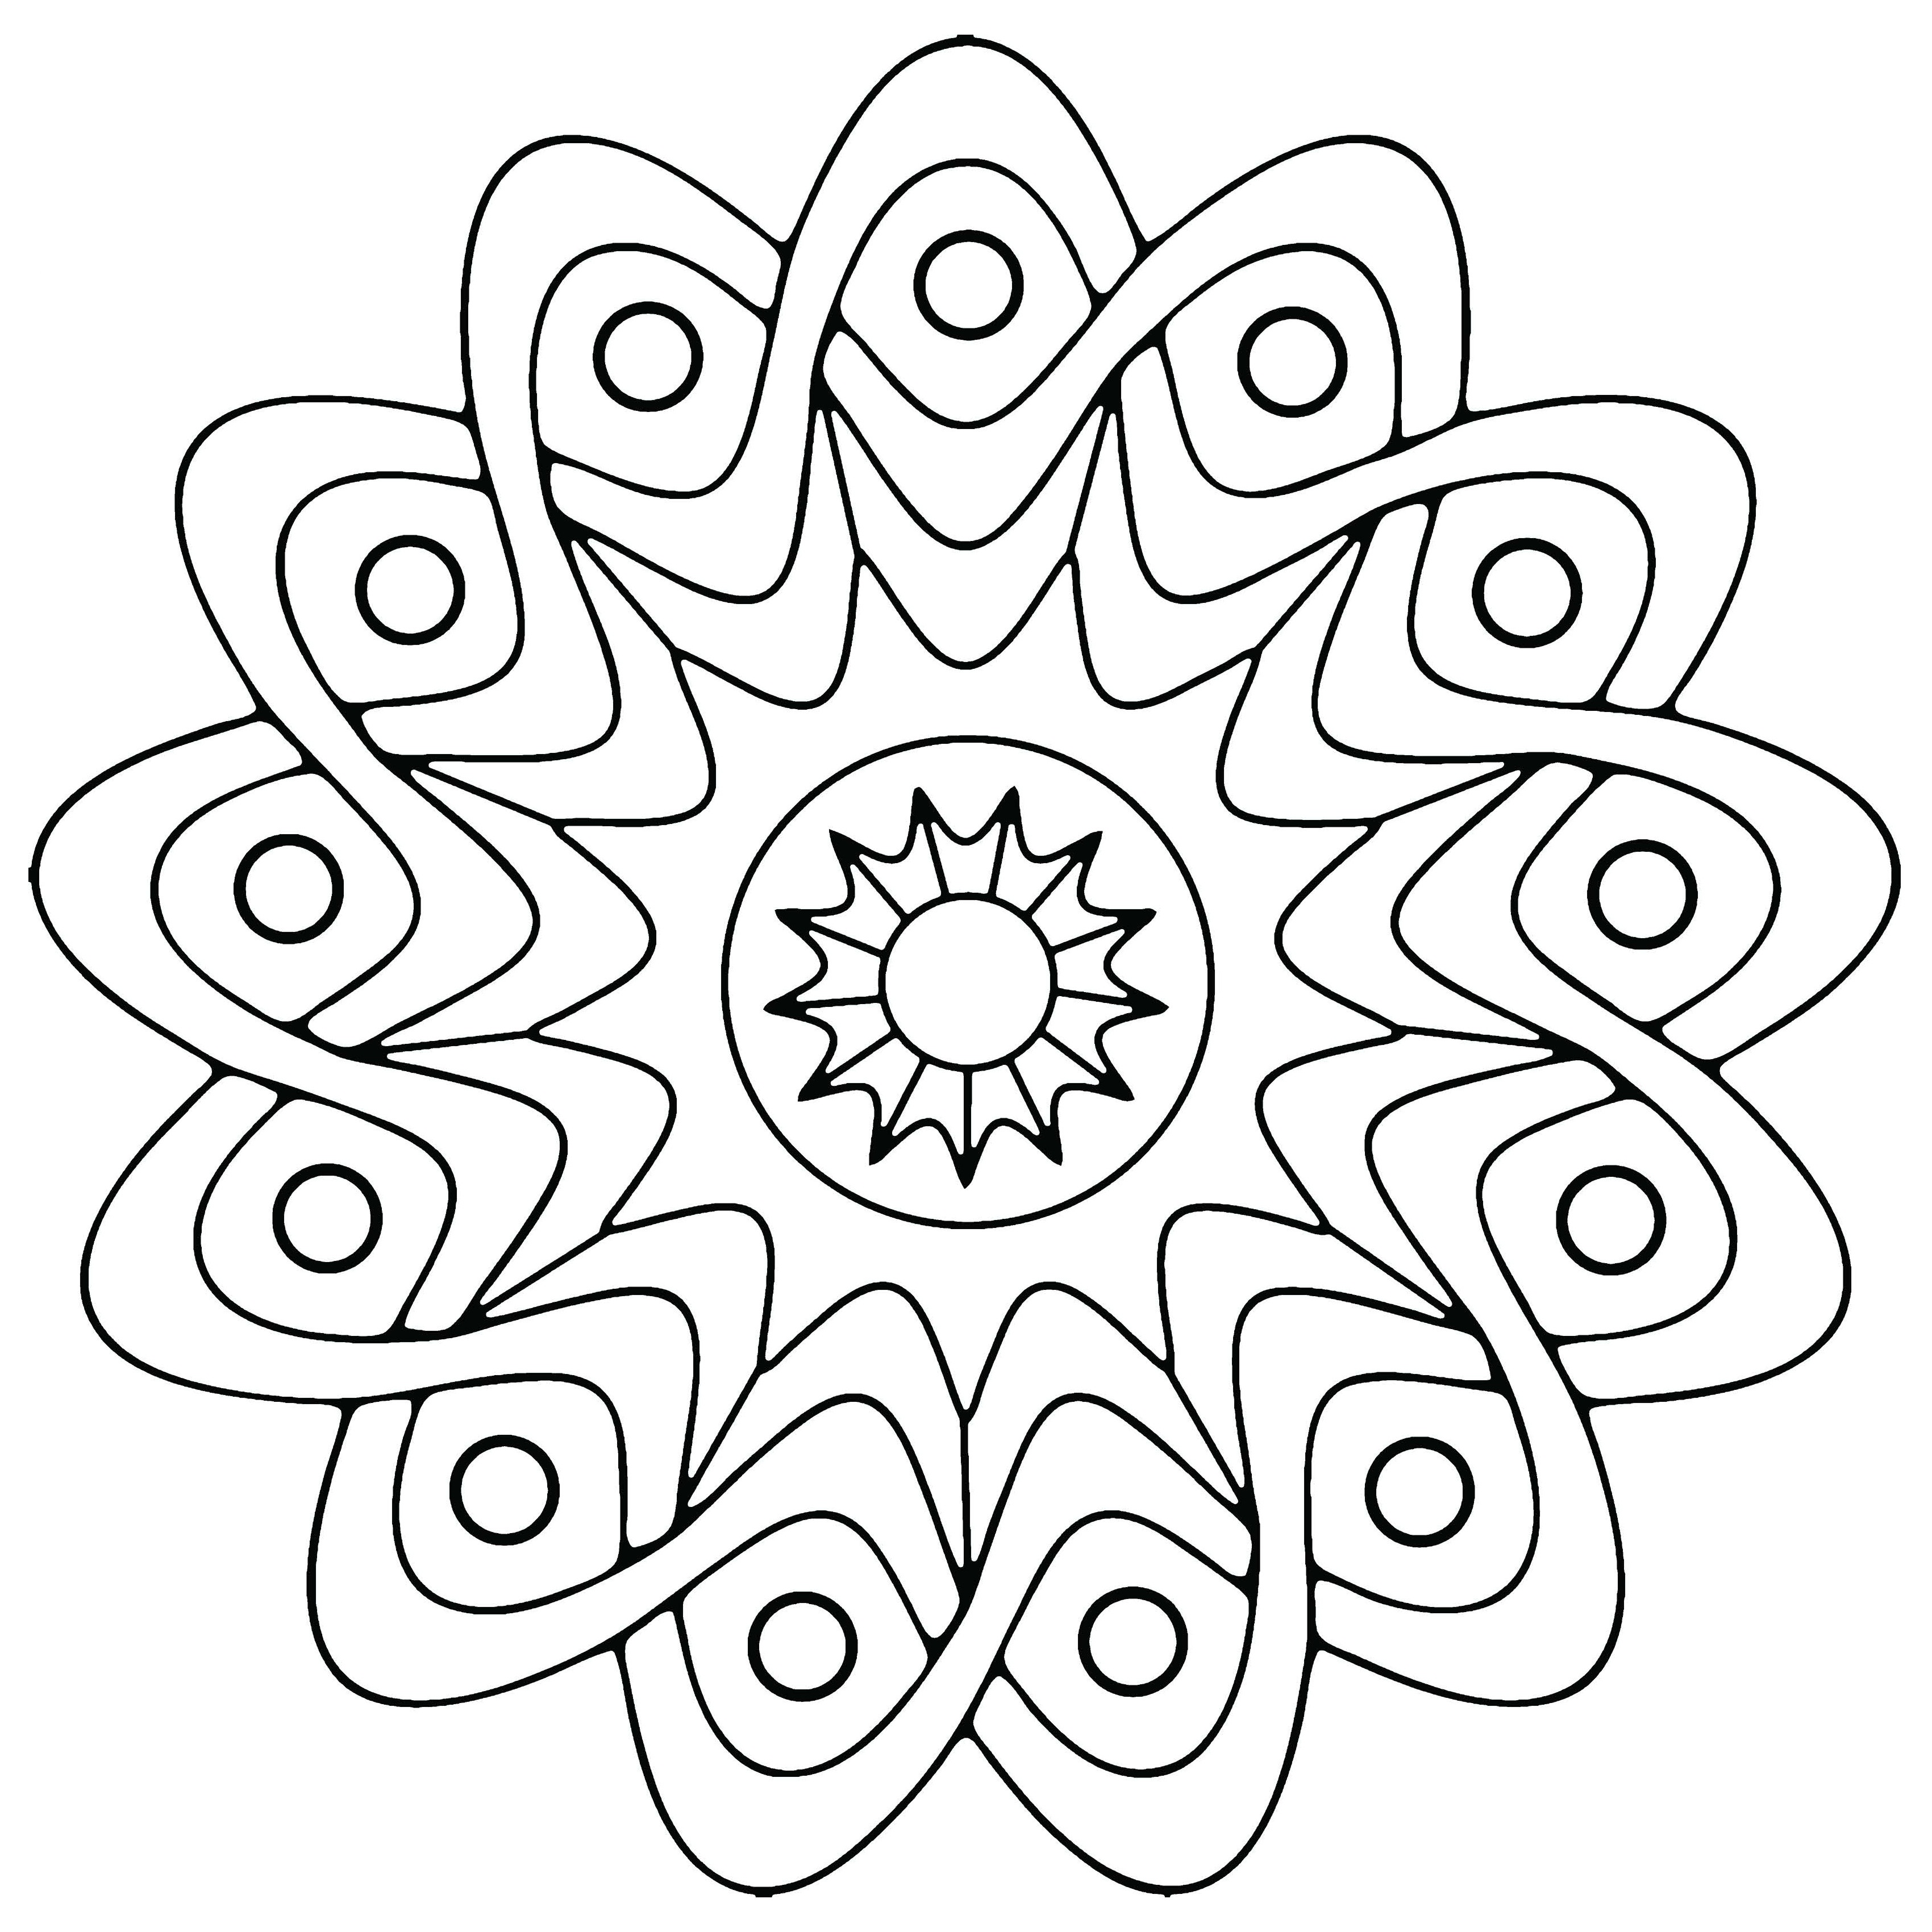 easy pattern coloring pages